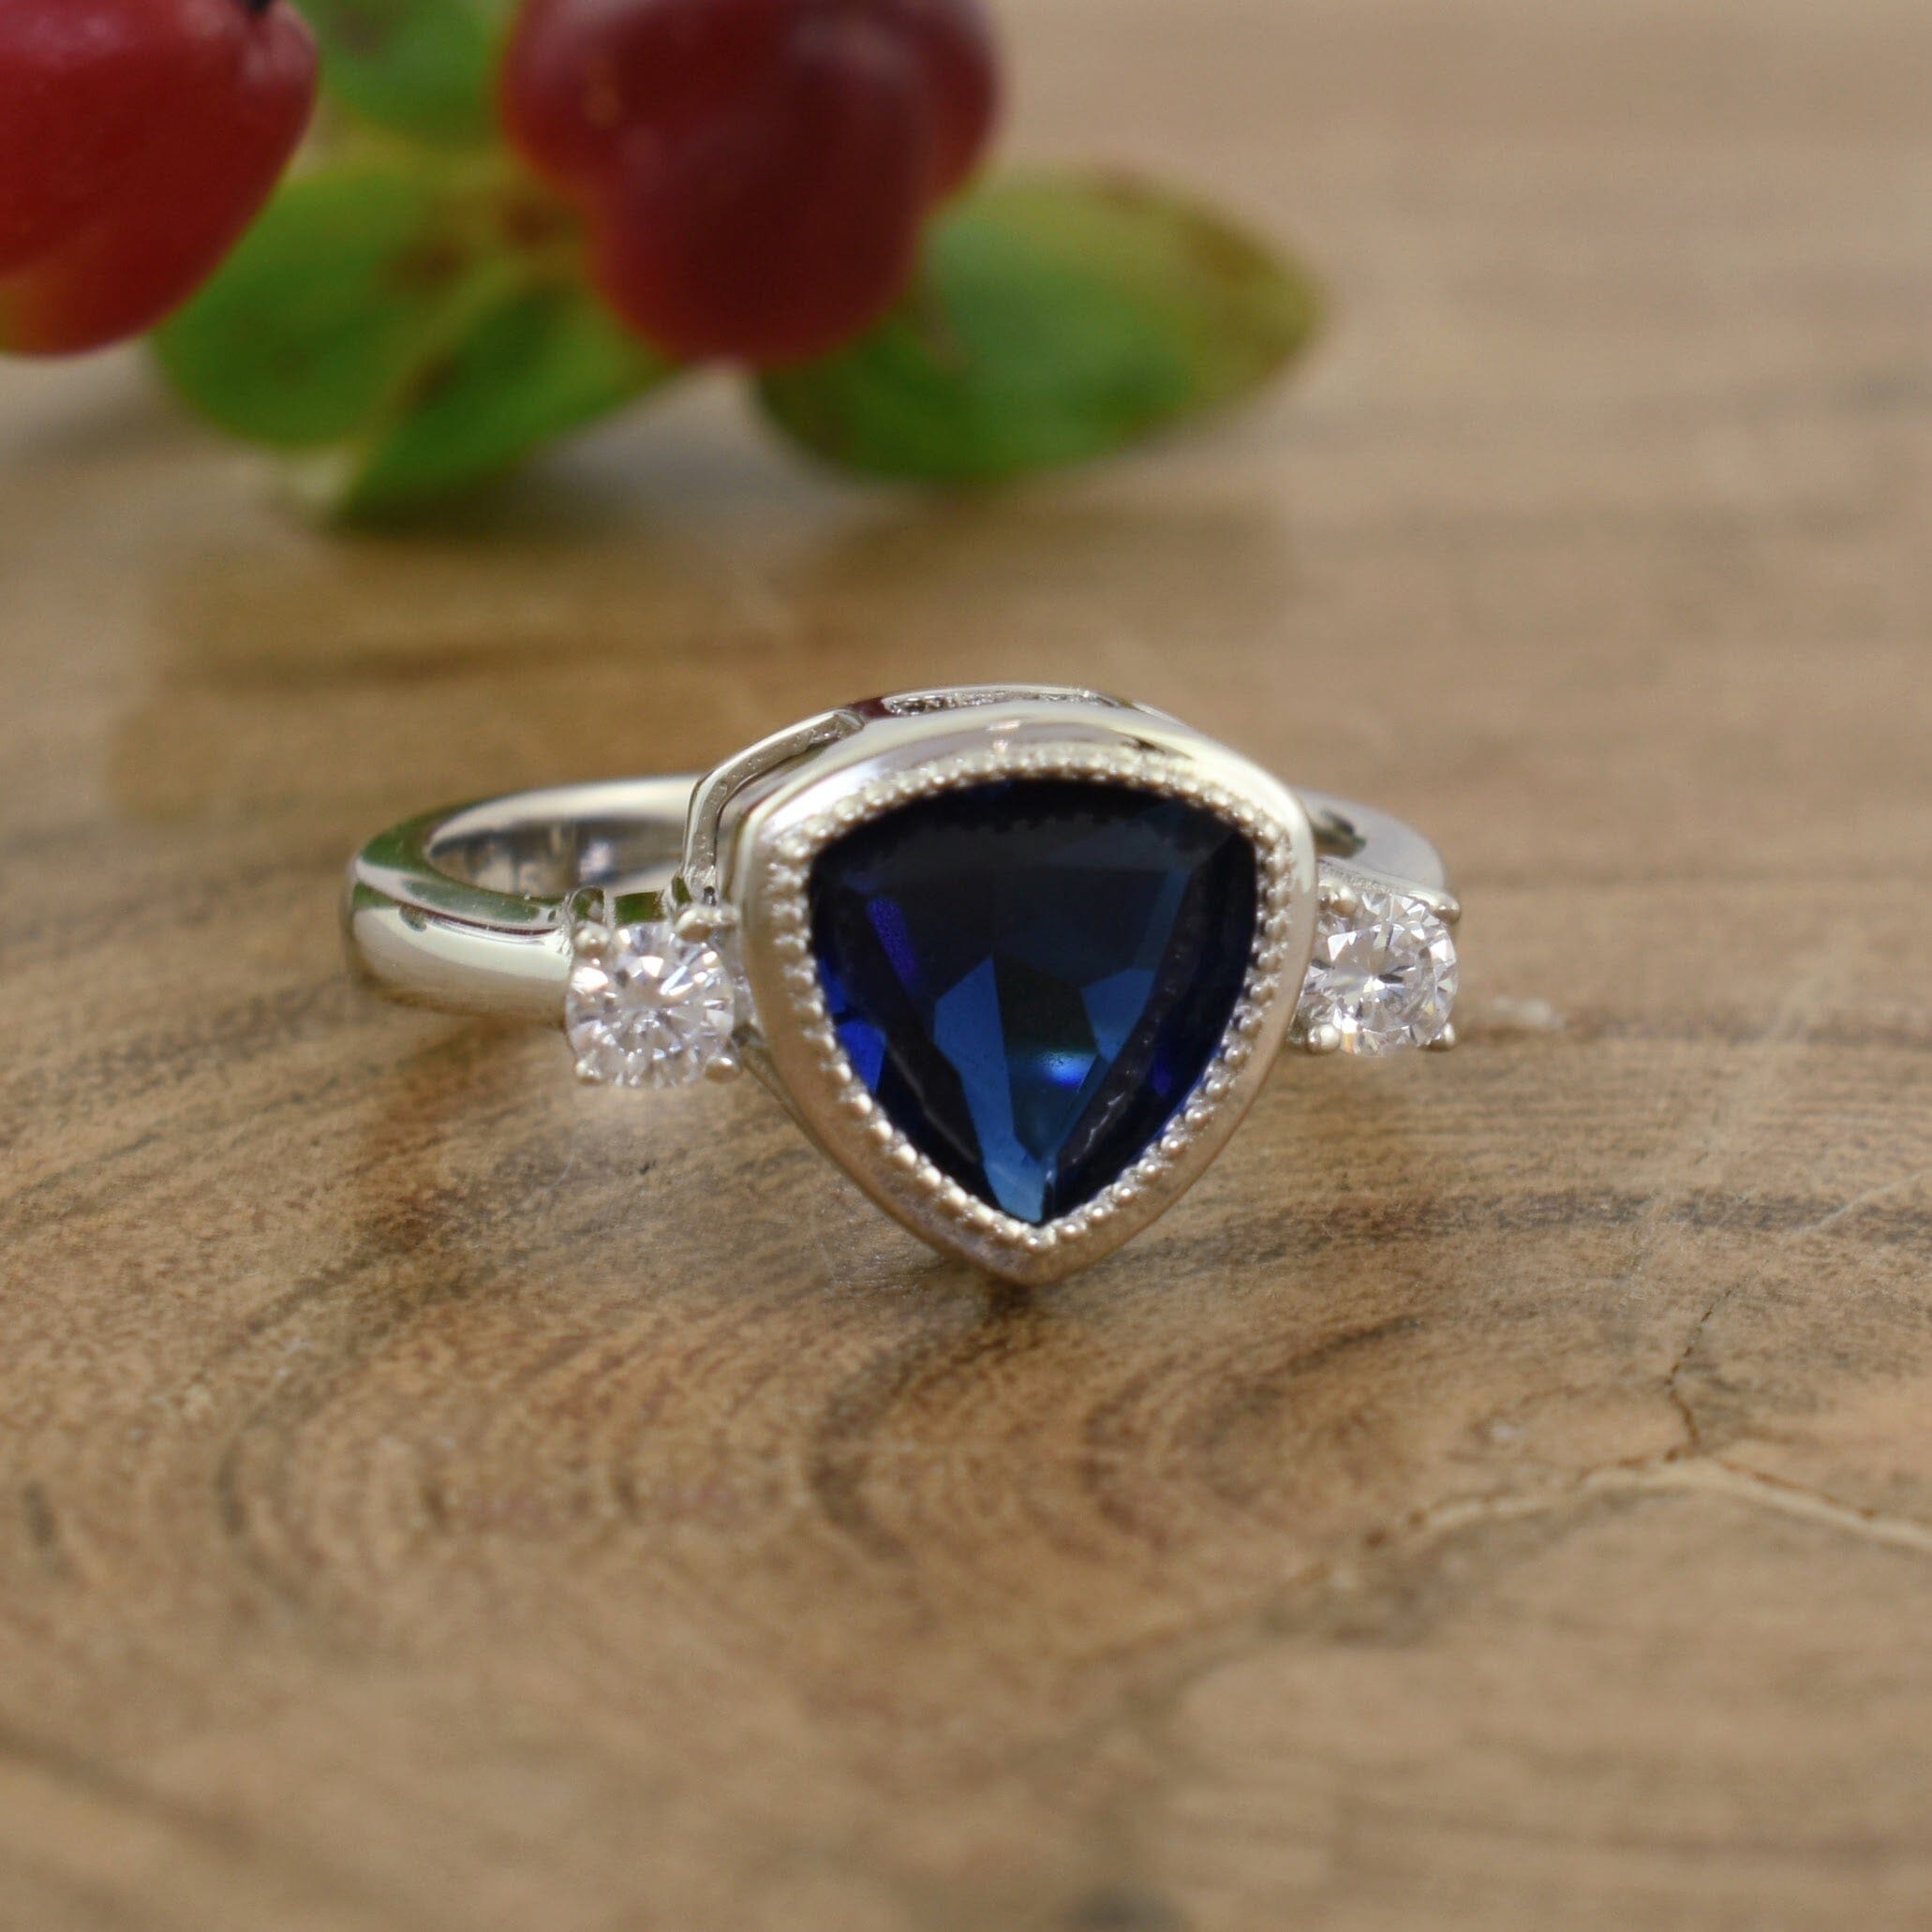 Designer ring featuring sterling silver, faux blue sapphire, and CZ